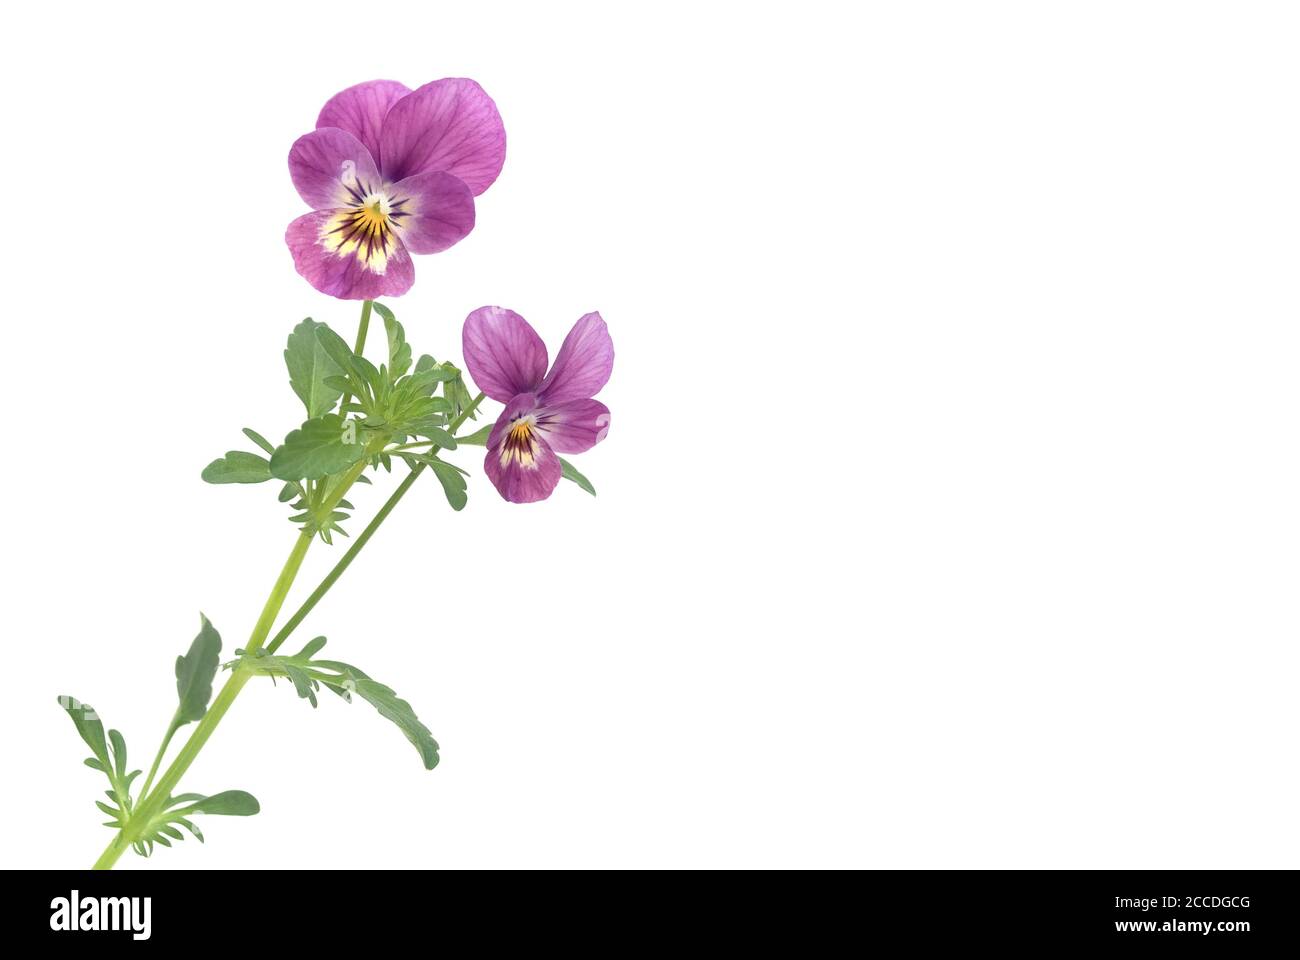 Isolated pansy against white background Stock Photo